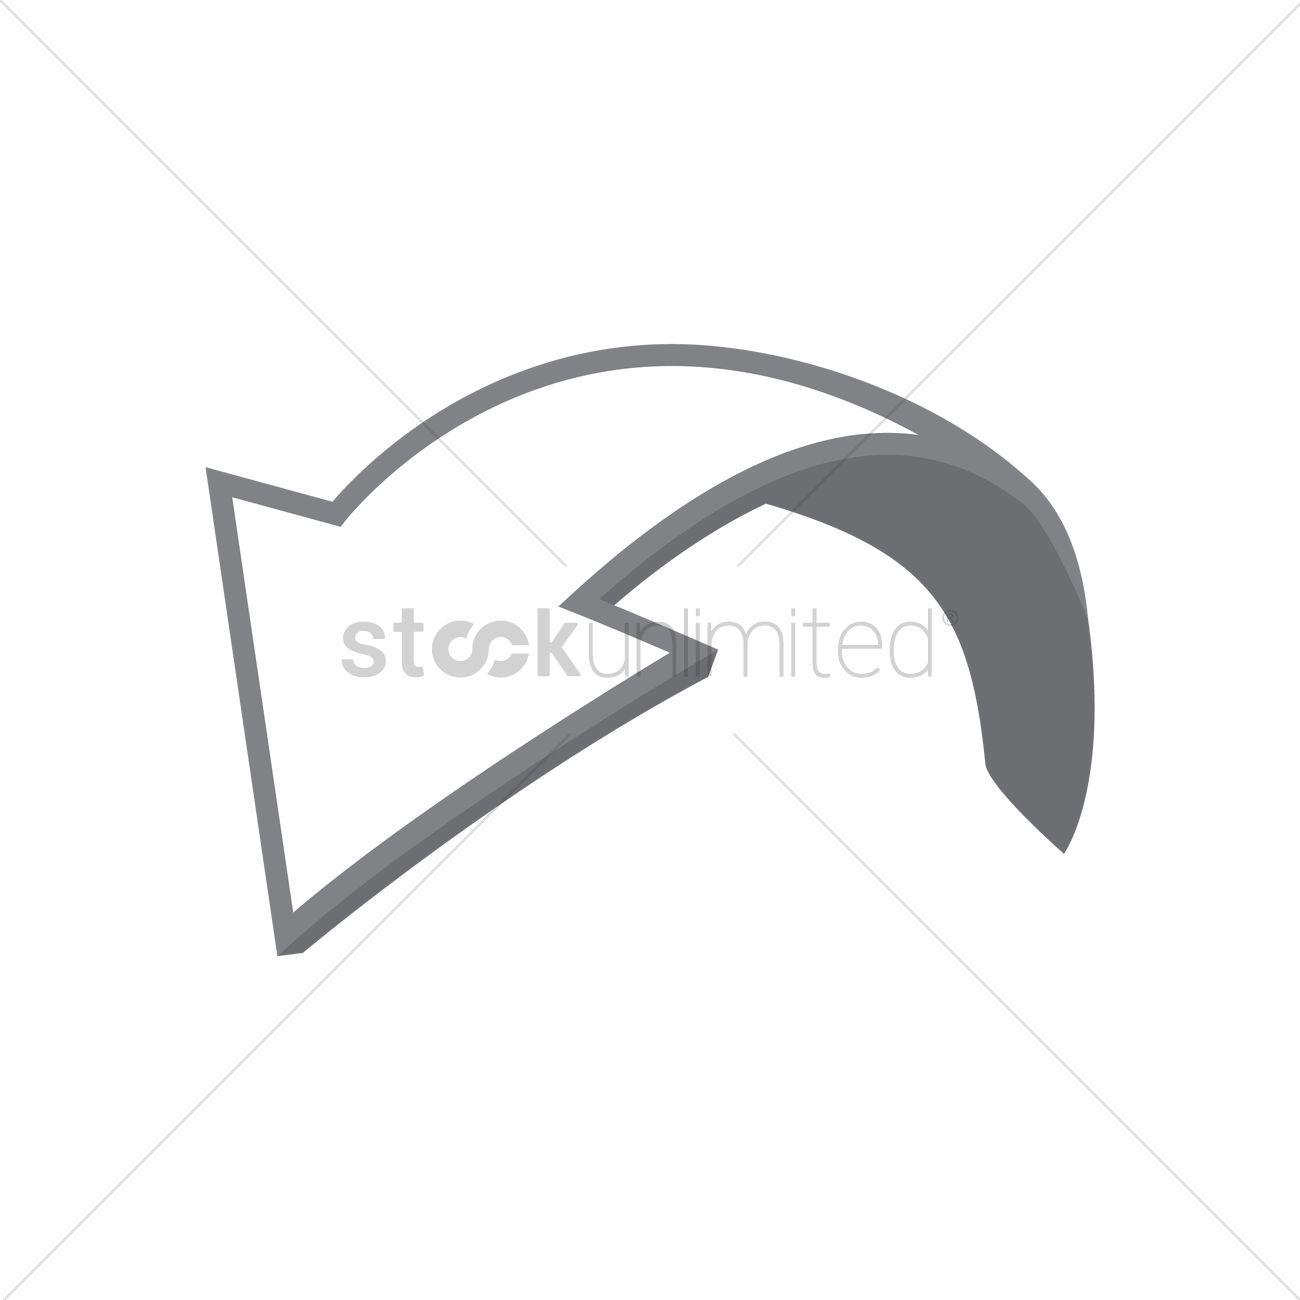 White Curved Arrow Logo - Curved arrow Vector Image - 1630265 | StockUnlimited